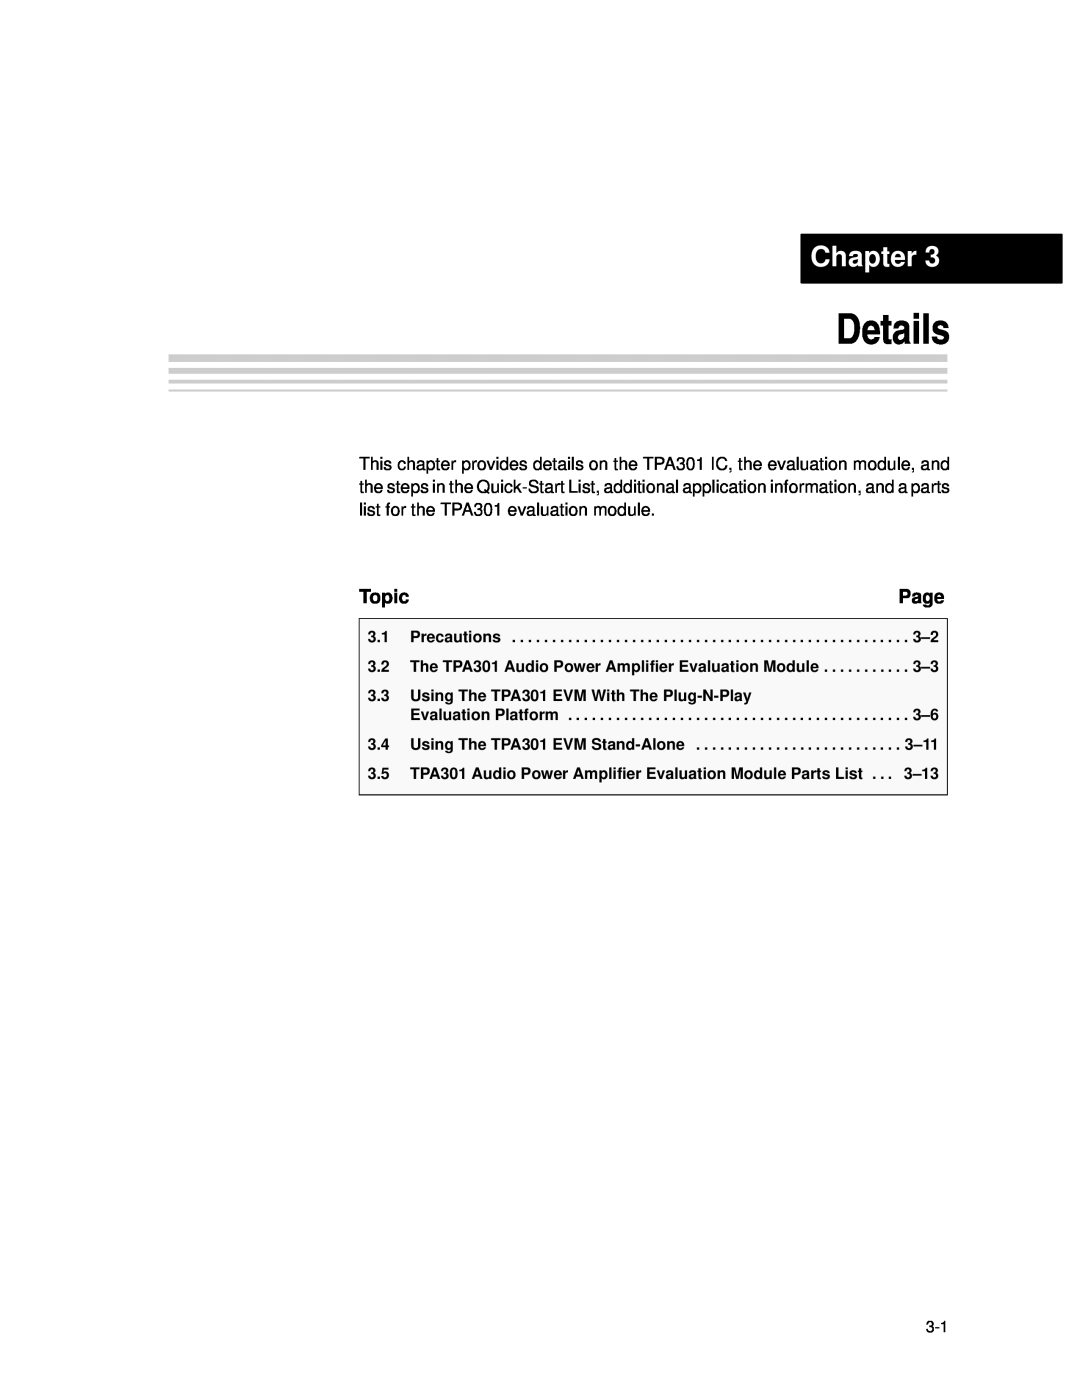 Texas Instruments TPA301 manual Details, Chapter, Page, Topic 